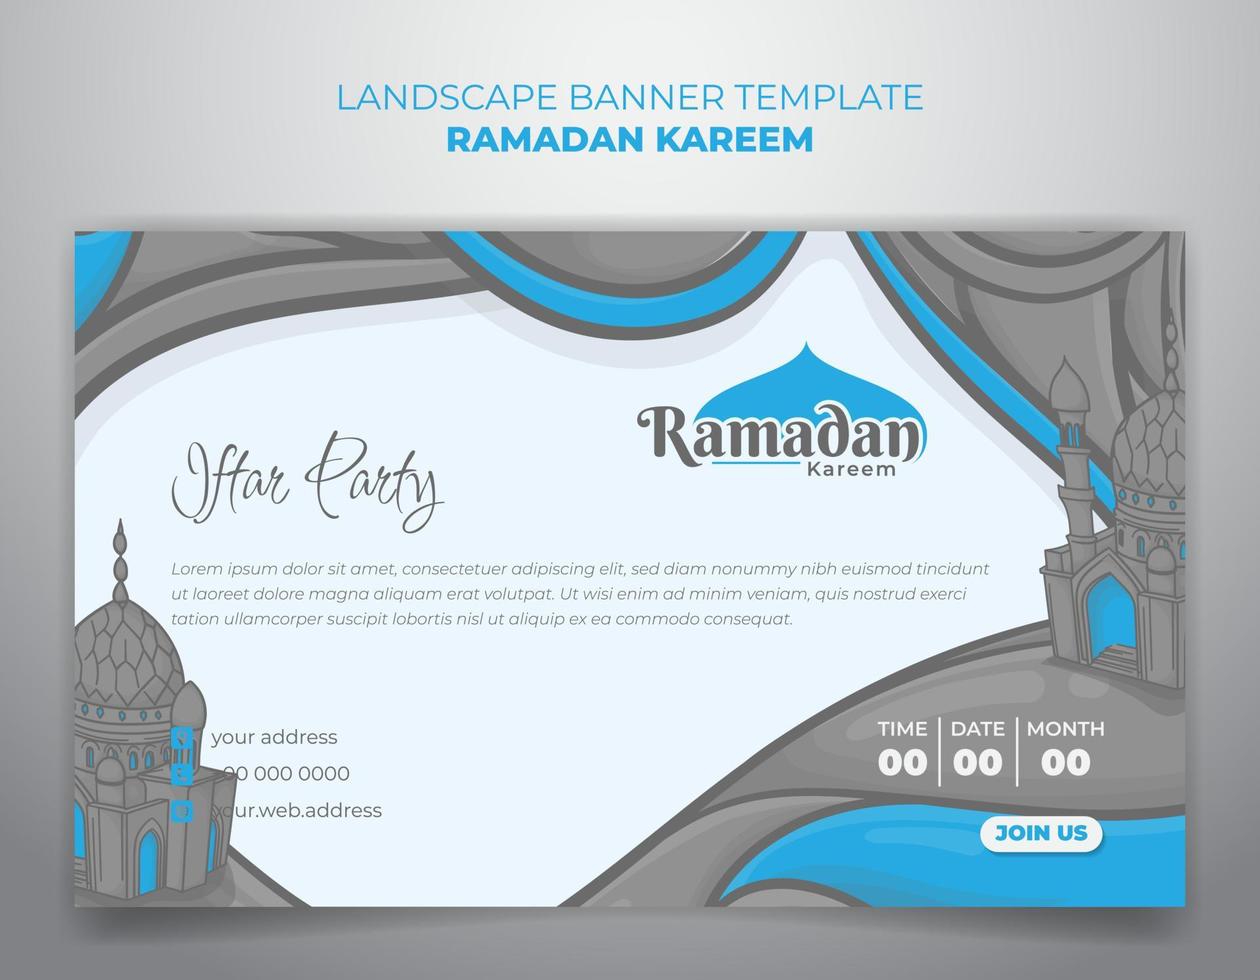 Landscape banner template with cartoon mosque and background design for ramadan kareem vector